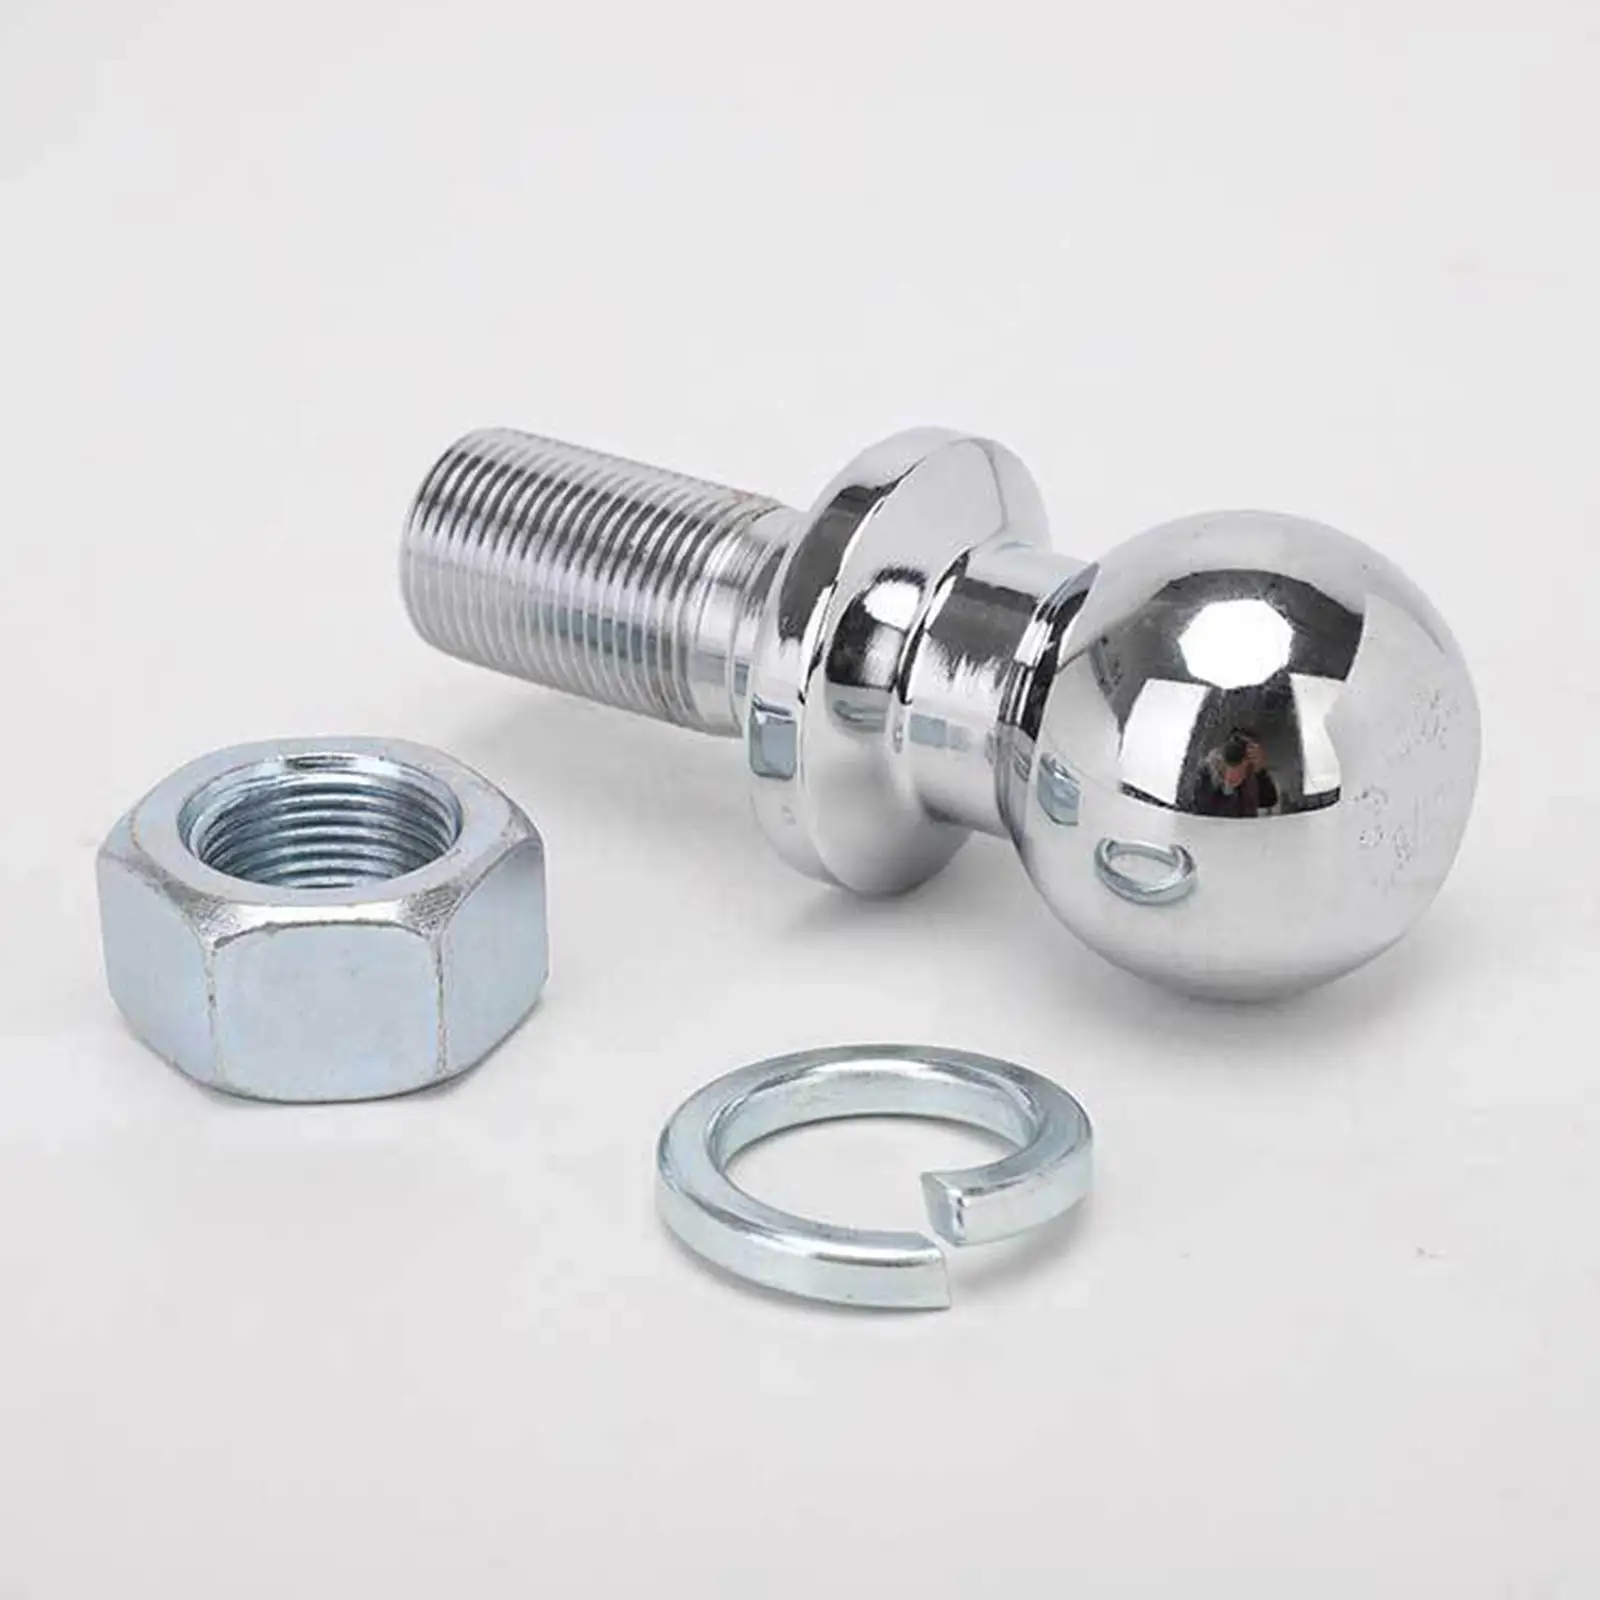 Lawn Tractor Hitch Ball Threaded Connection 22 mm Accessories Replaces Metal